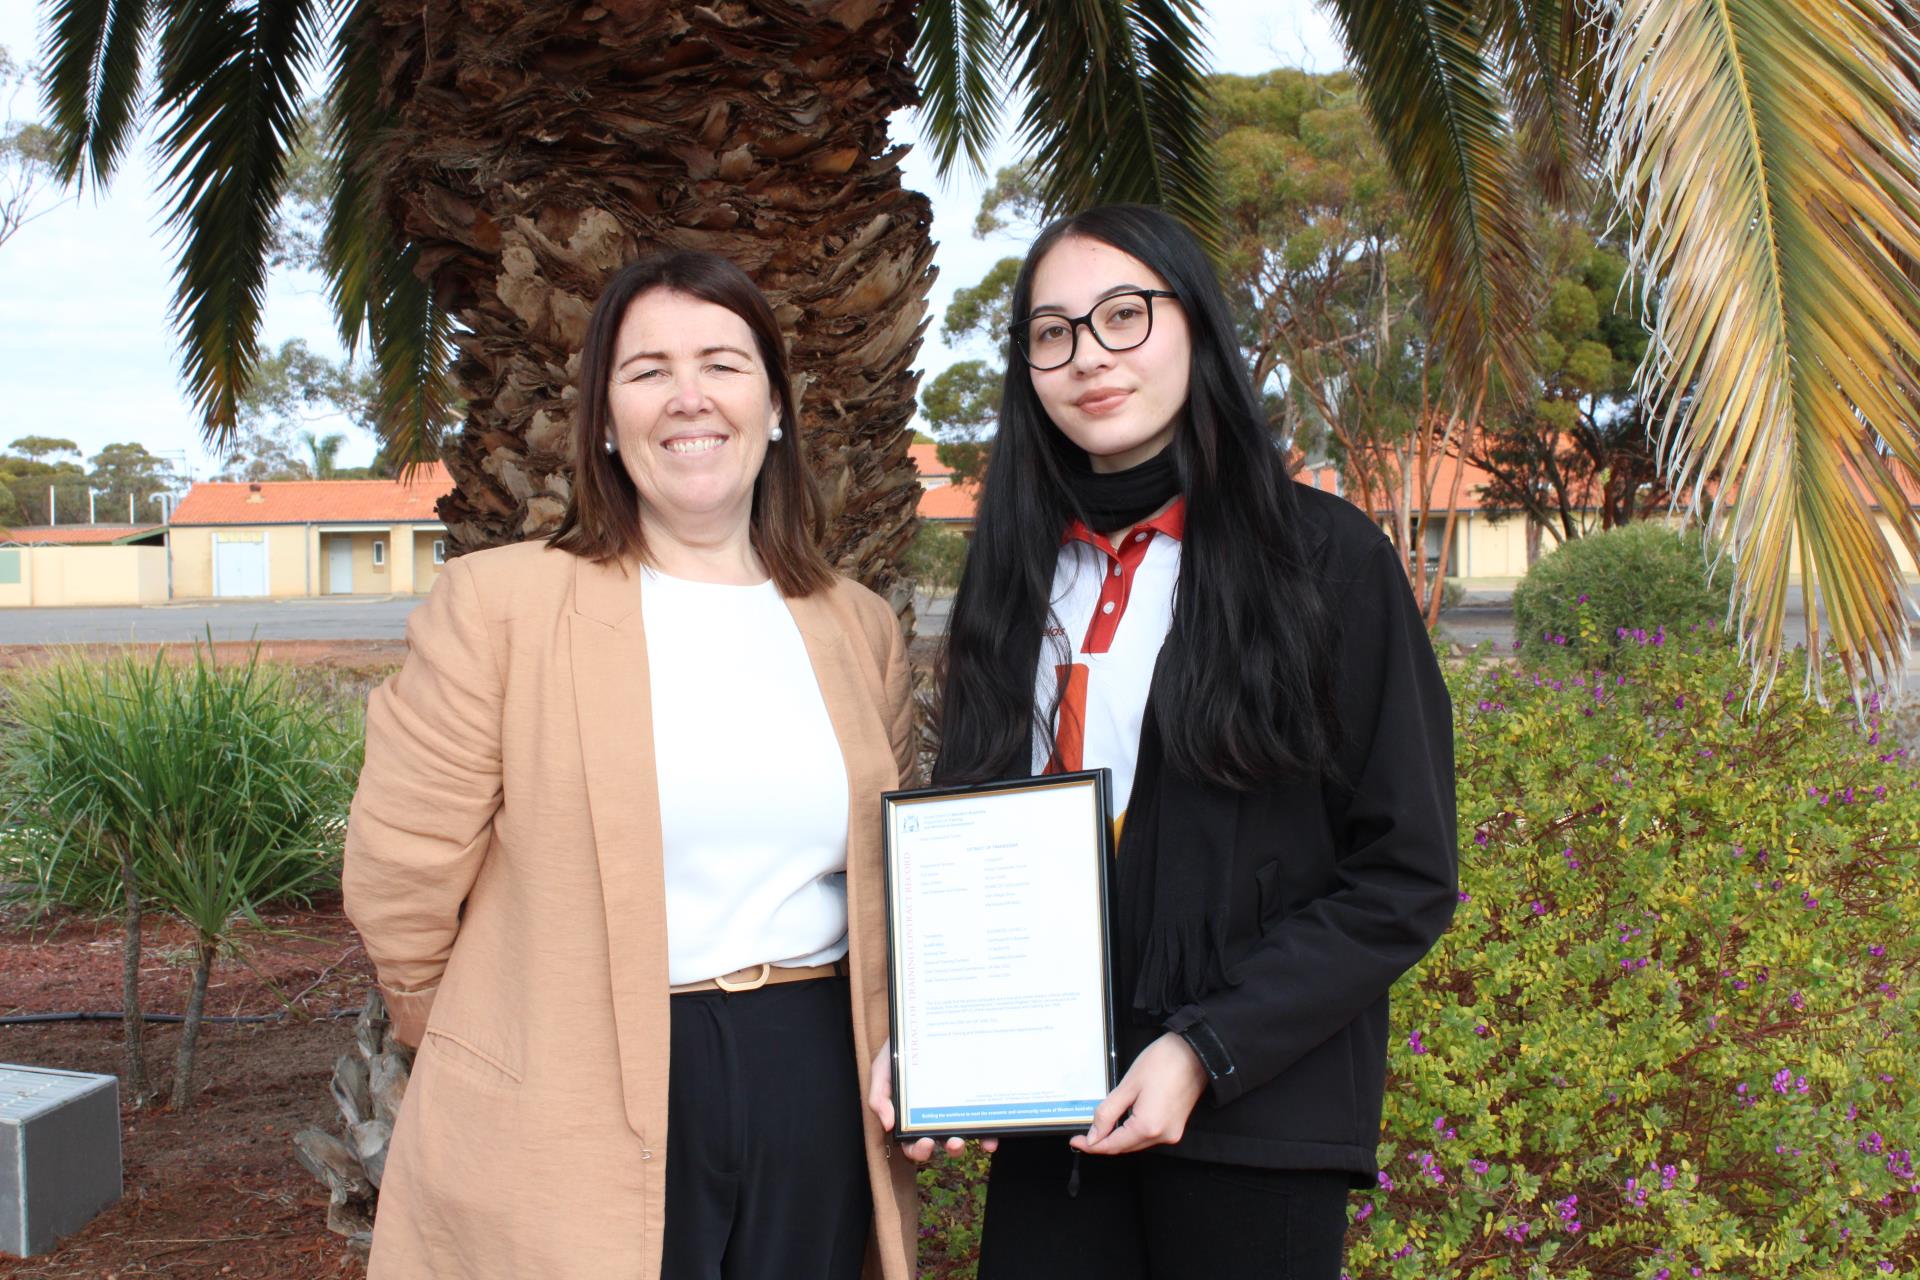 Student jumps leaps and bounds at the Shire of Coolgardie